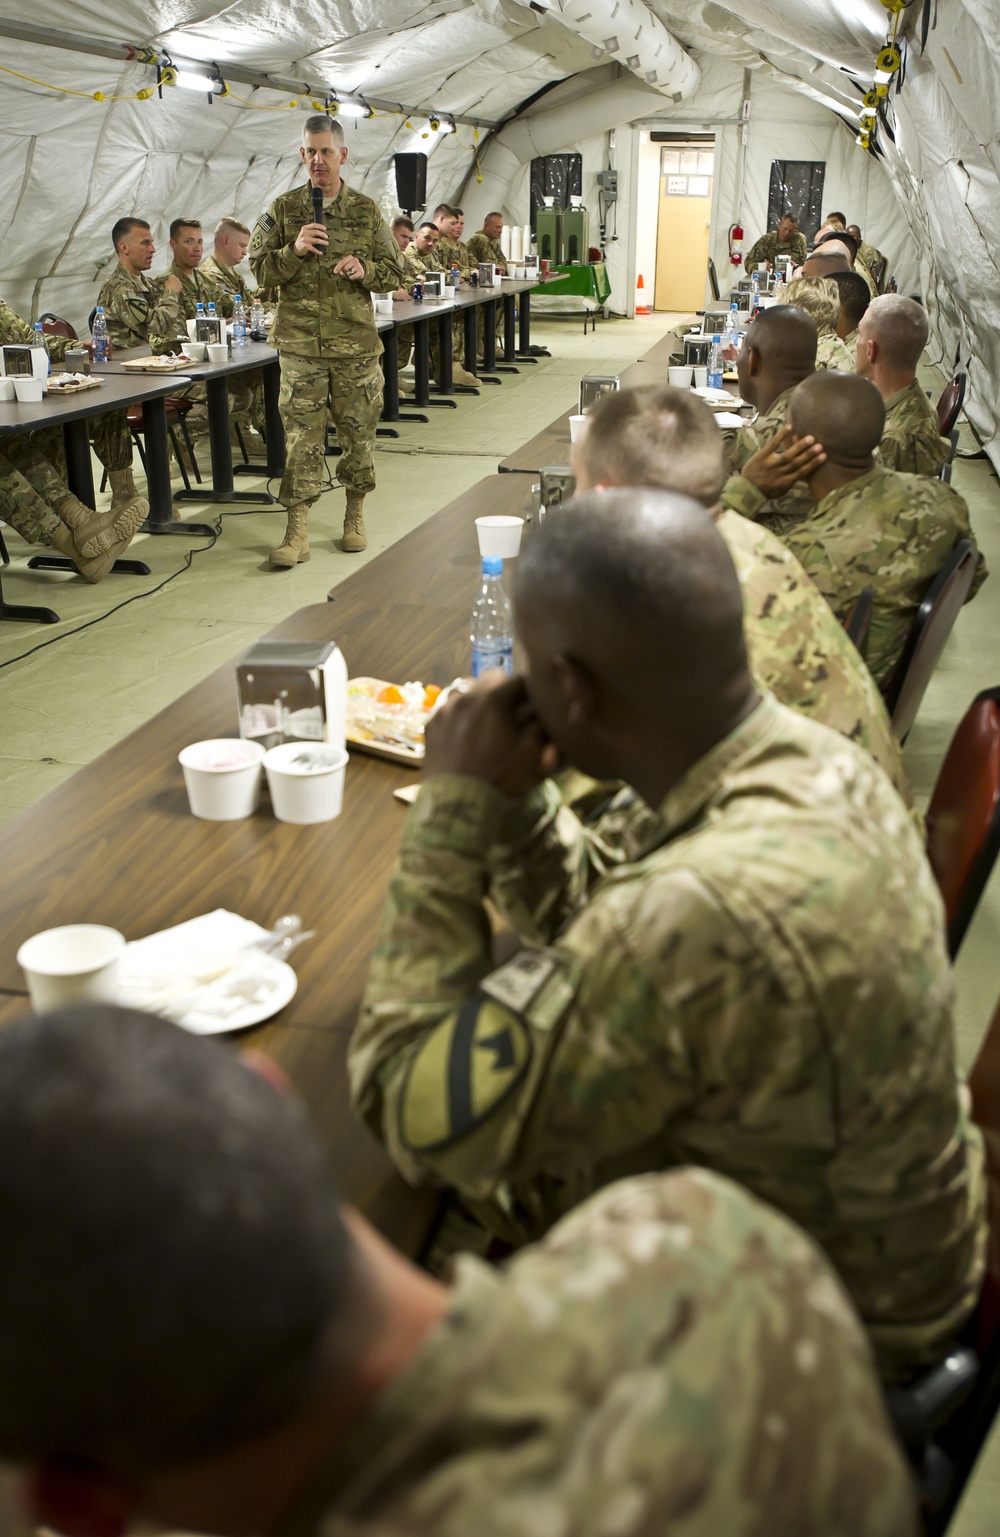 III Corps’ command visits the 1st ACB in Afghanistan